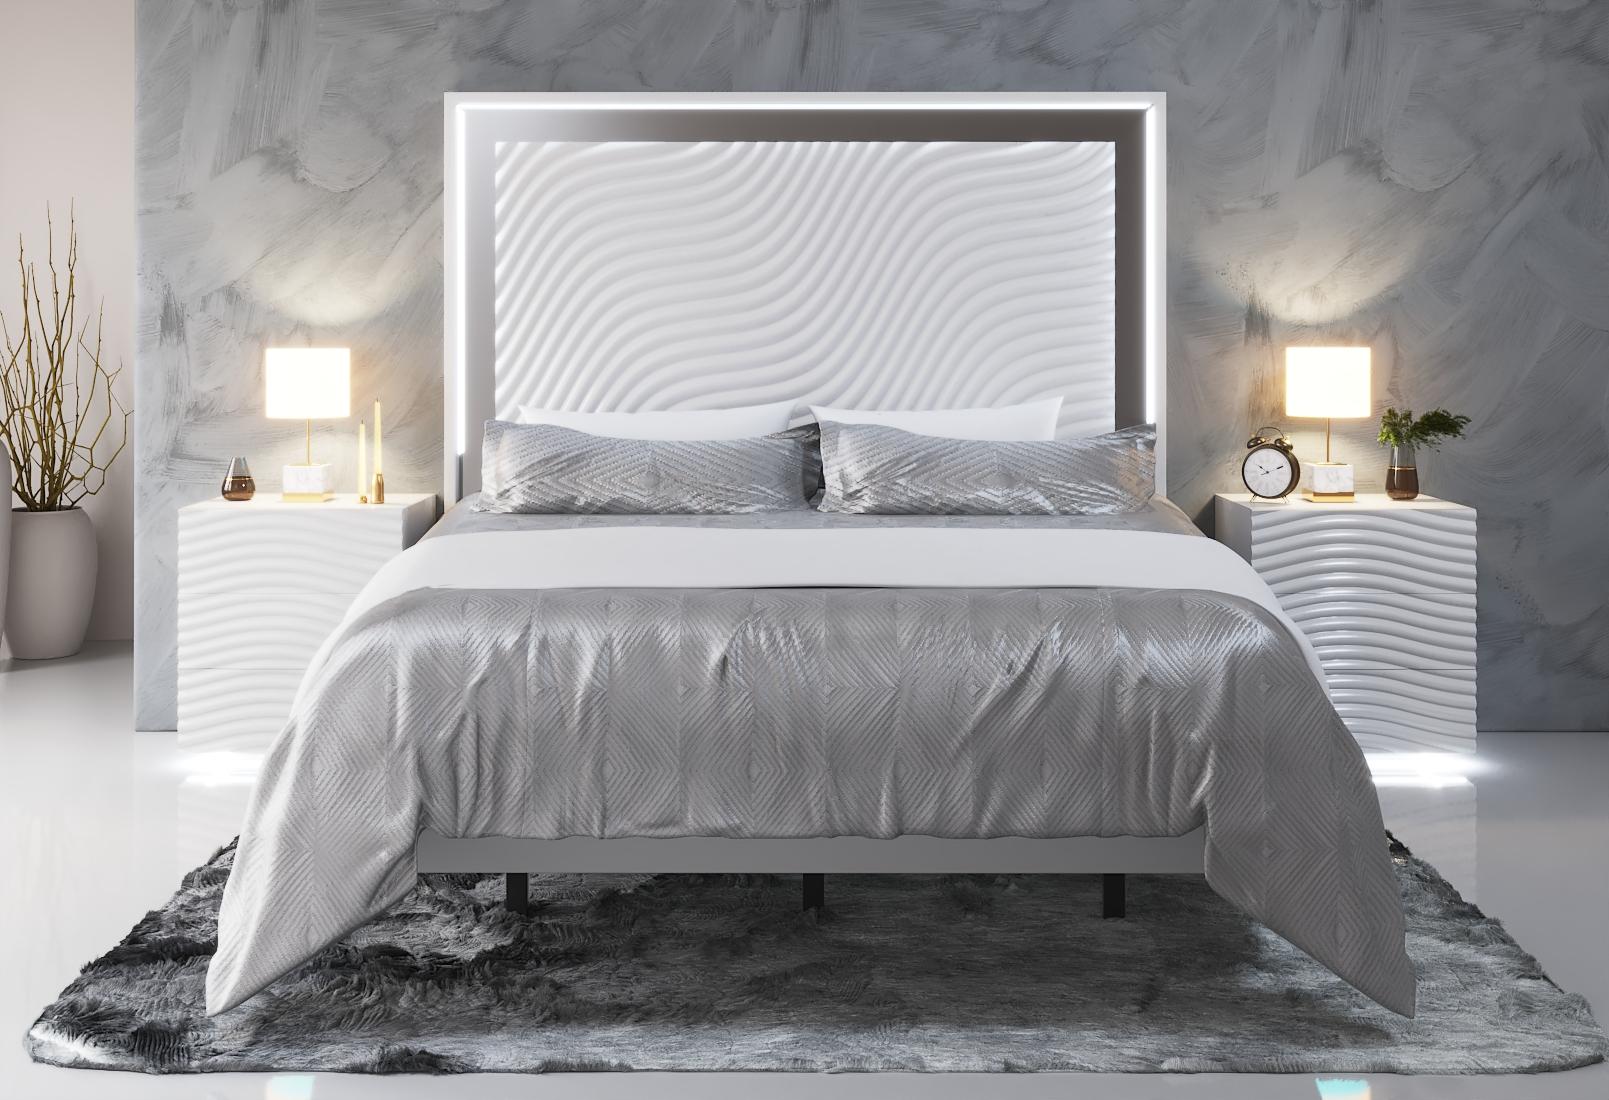 

    
Glam Shiny White Queen Bedroom Set 3 WAVE ESF Contemporary Modern MADE IN SPAIN
